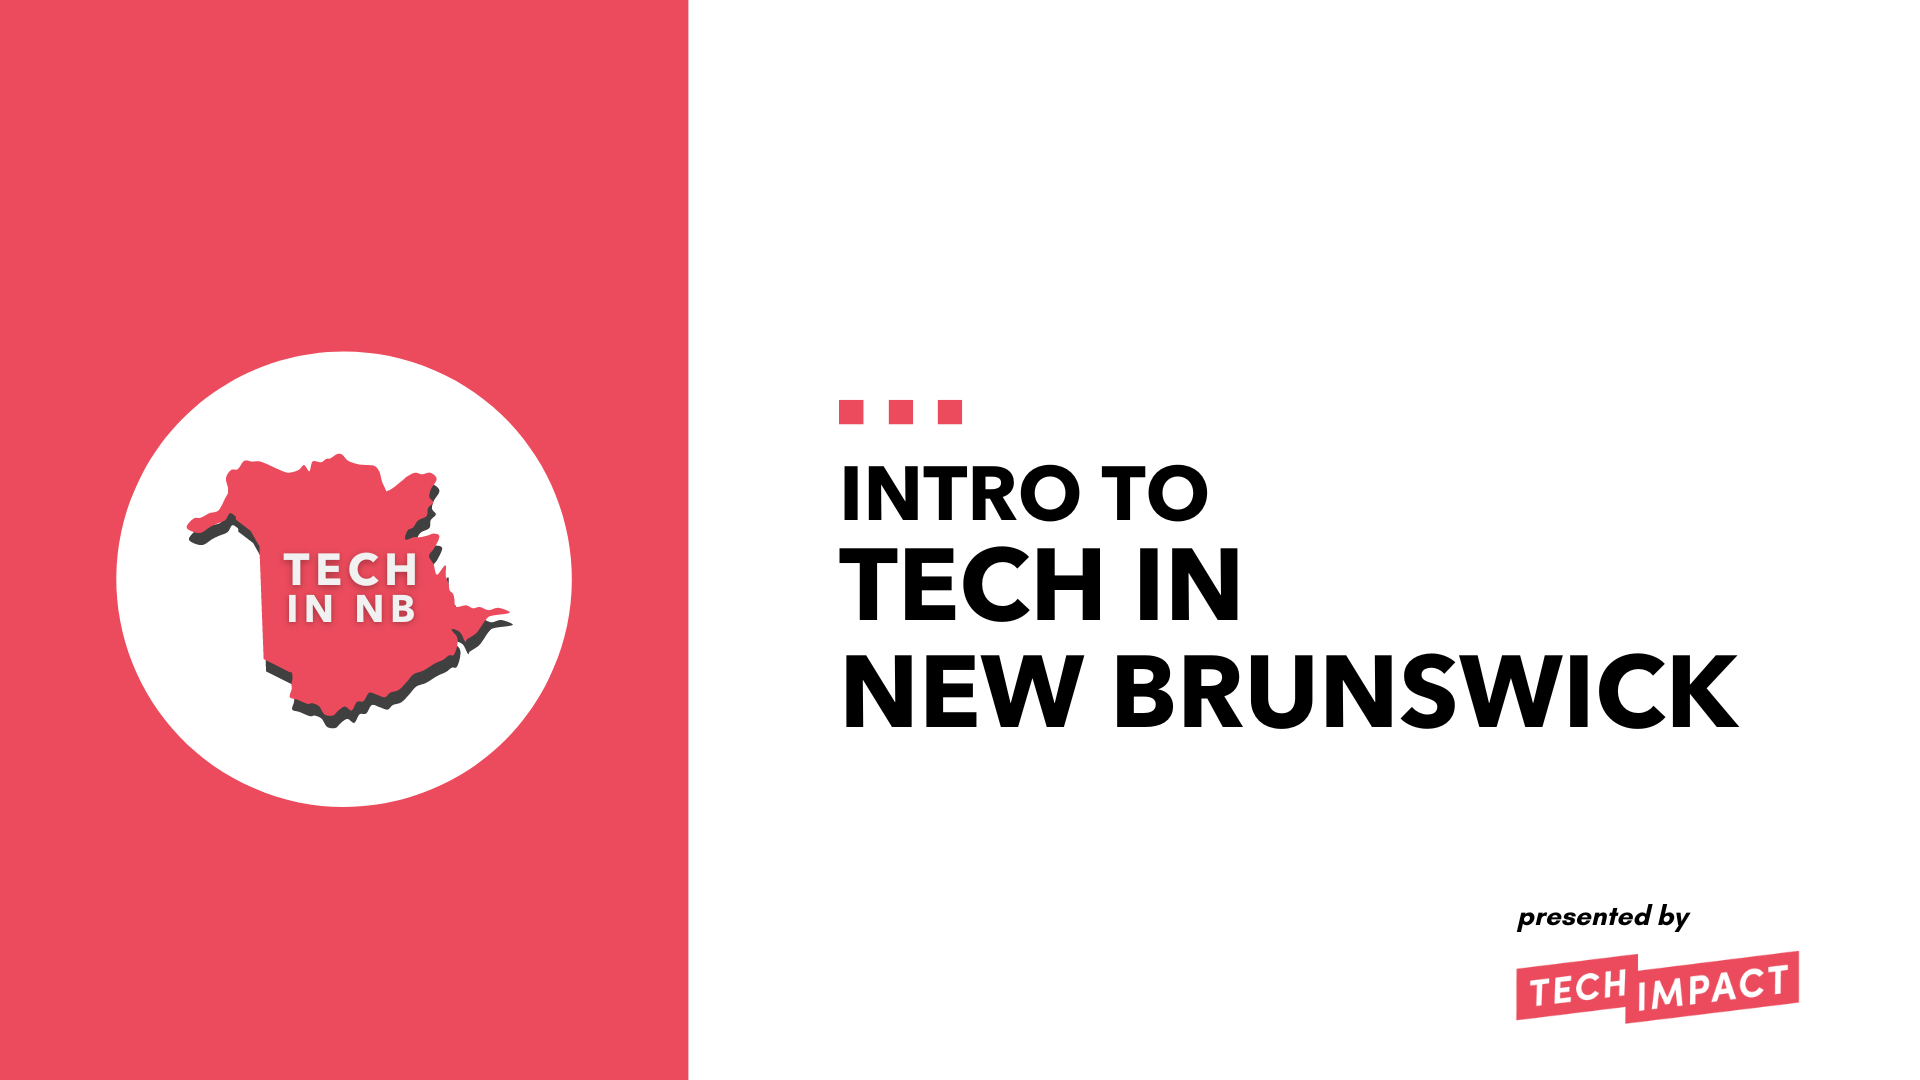 Intro to Tech in New Brunswick - deck